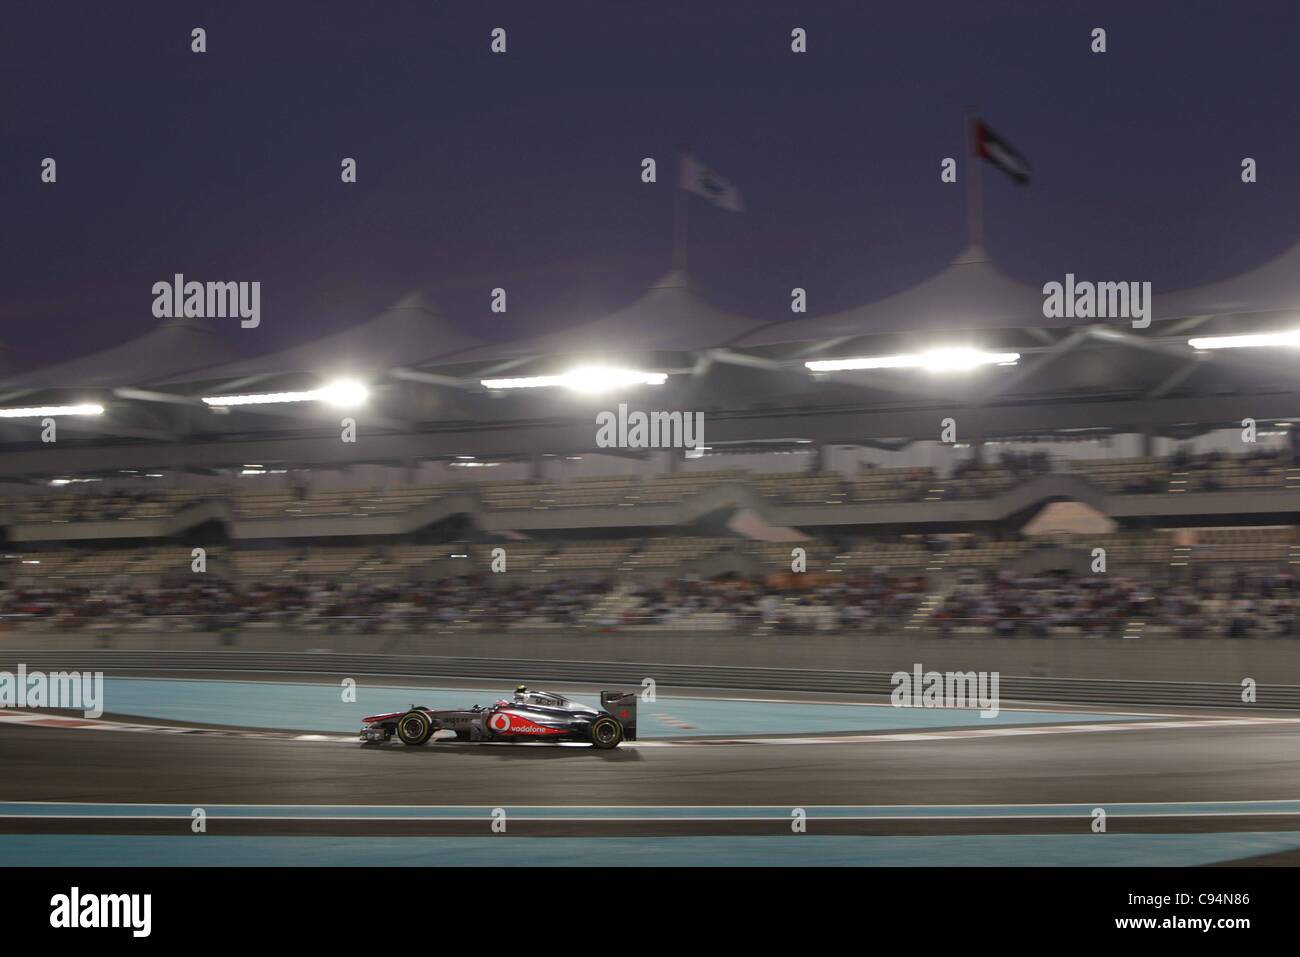 13.11.2011. Abu Dhabi.   Jenson Button McLaren Mercedes GP Abu Dhabi 2011 Formula 1 Grand Prix Abu Dhabi  . Hamilton won the race superbly in front of Alonso with Button in thrid place. Vettel retired on lap 1 of the race. Stock Photo